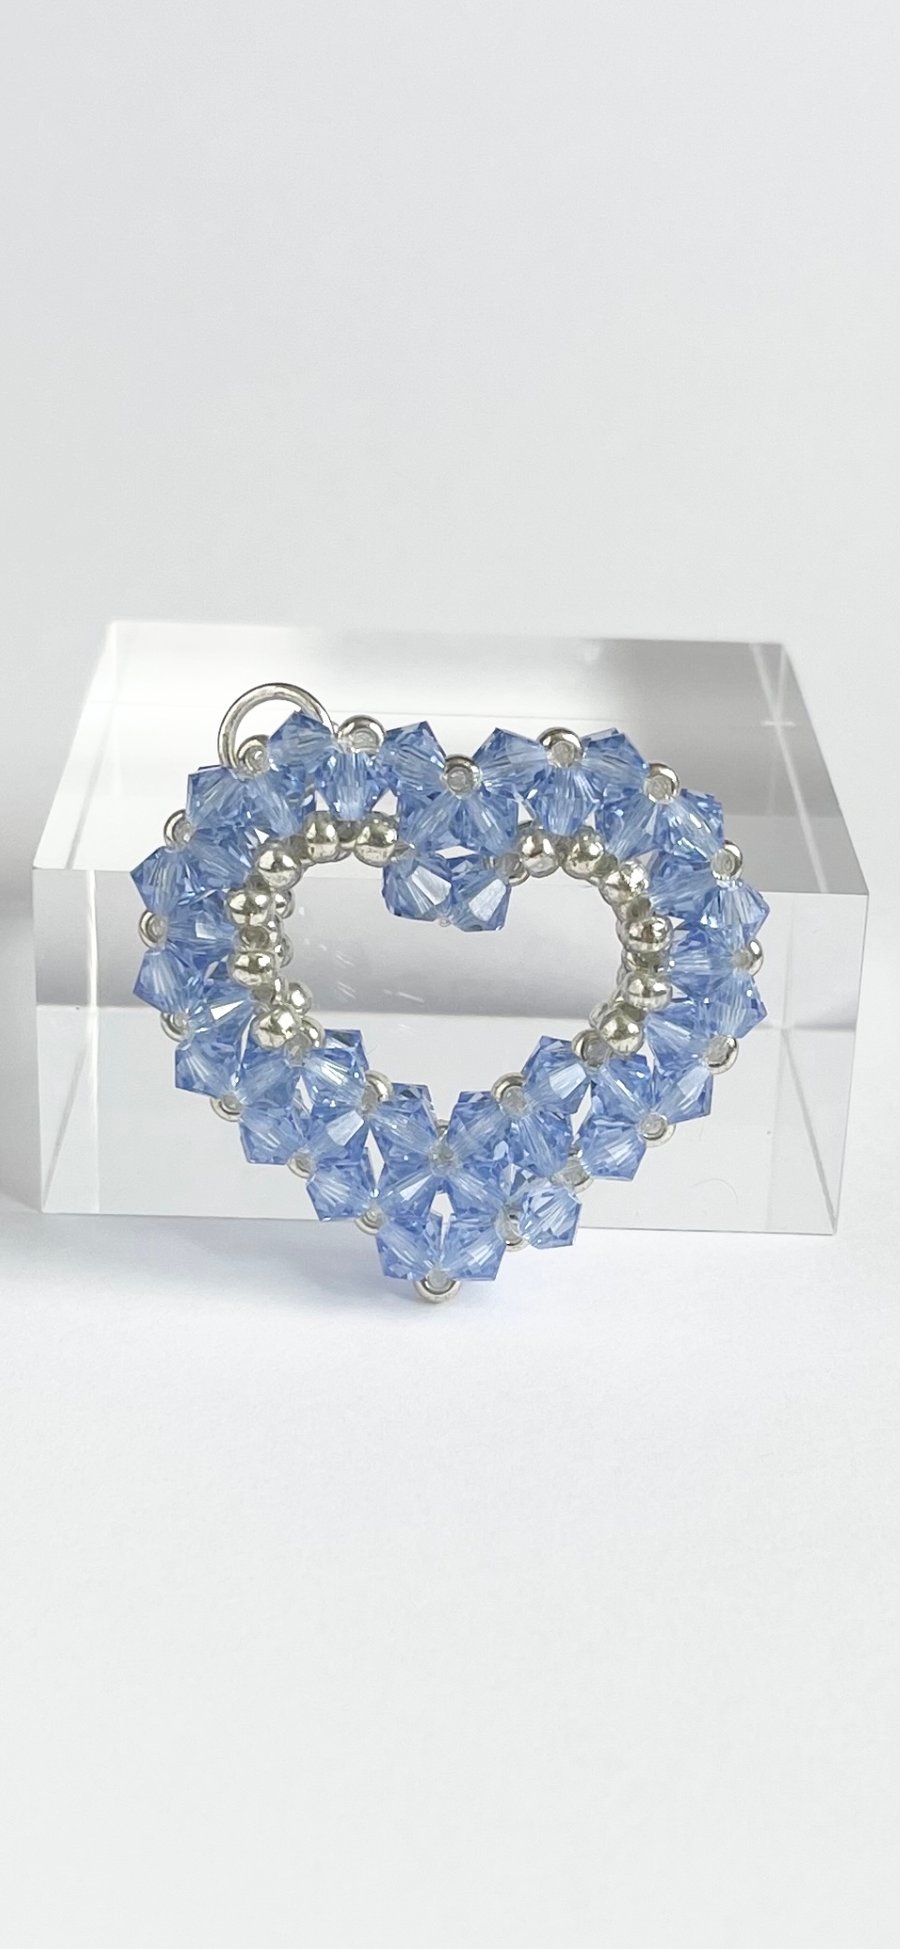 Blue Crystal Open Heart Handbag Charm, with a Chainmaille Chain and Keyring